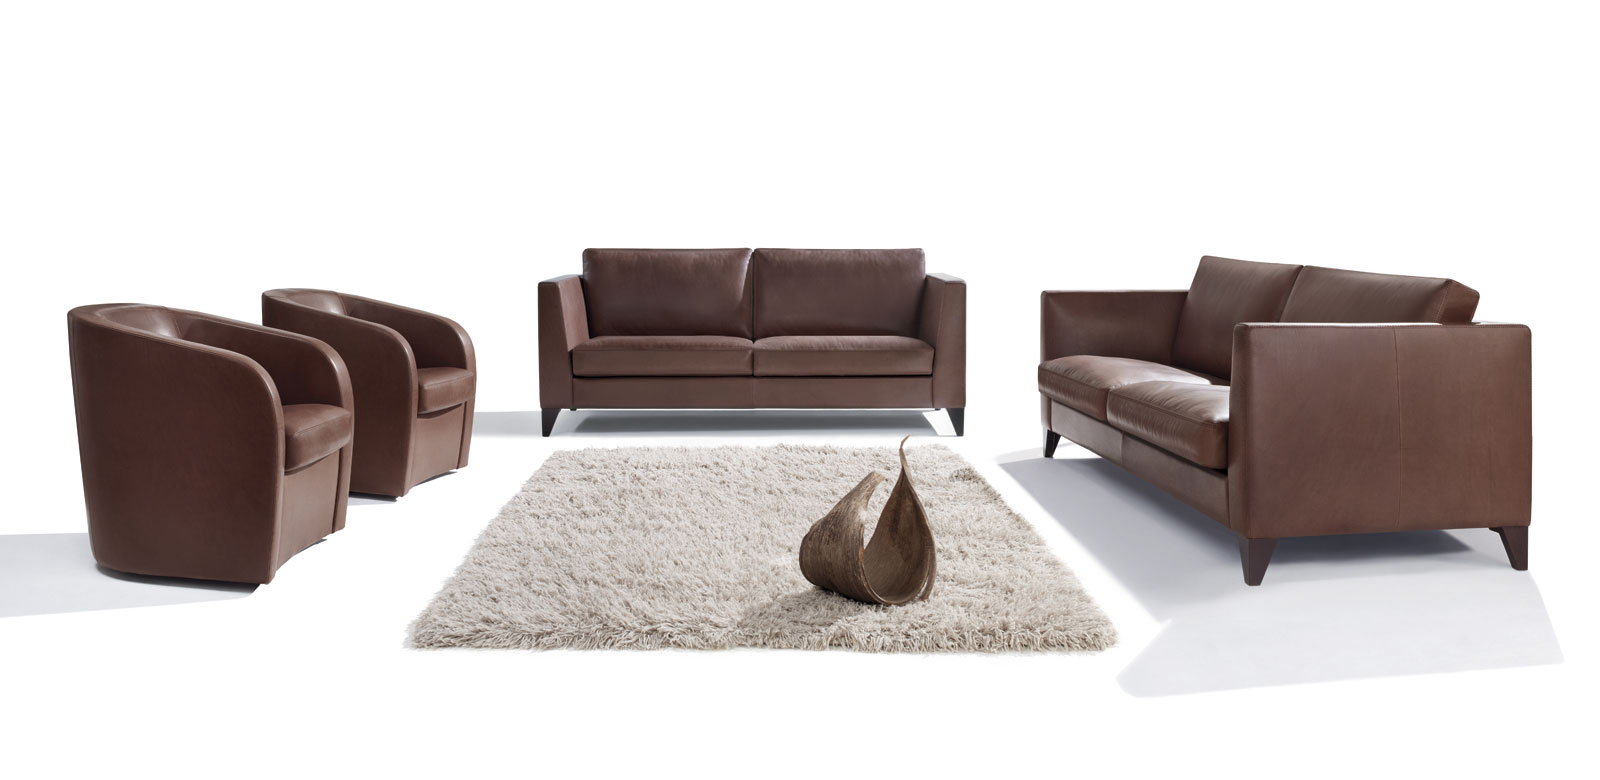 Two CL850 sofas in brown leather with matching armchairs